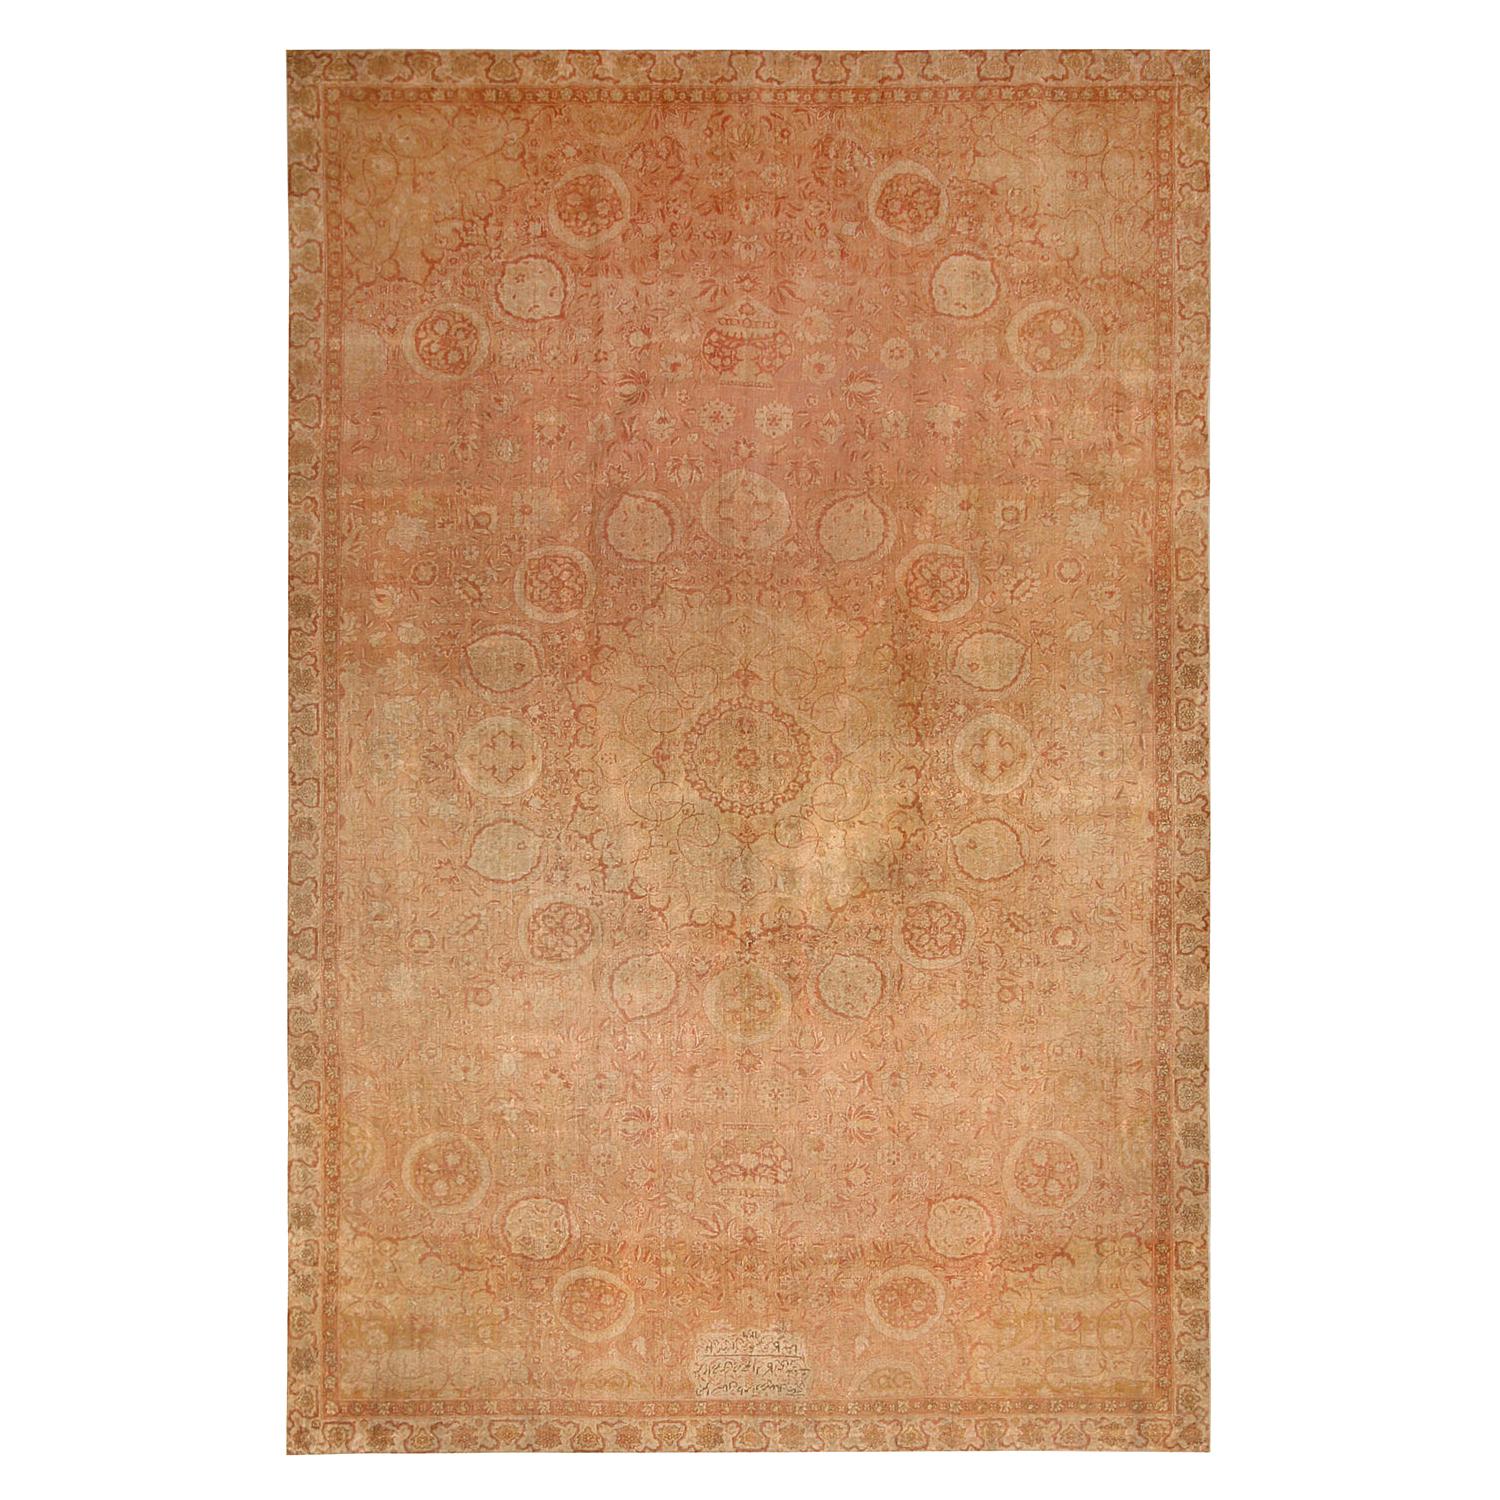 Antique Amritsar Traditional Beige and Pink Wool Floral Rug